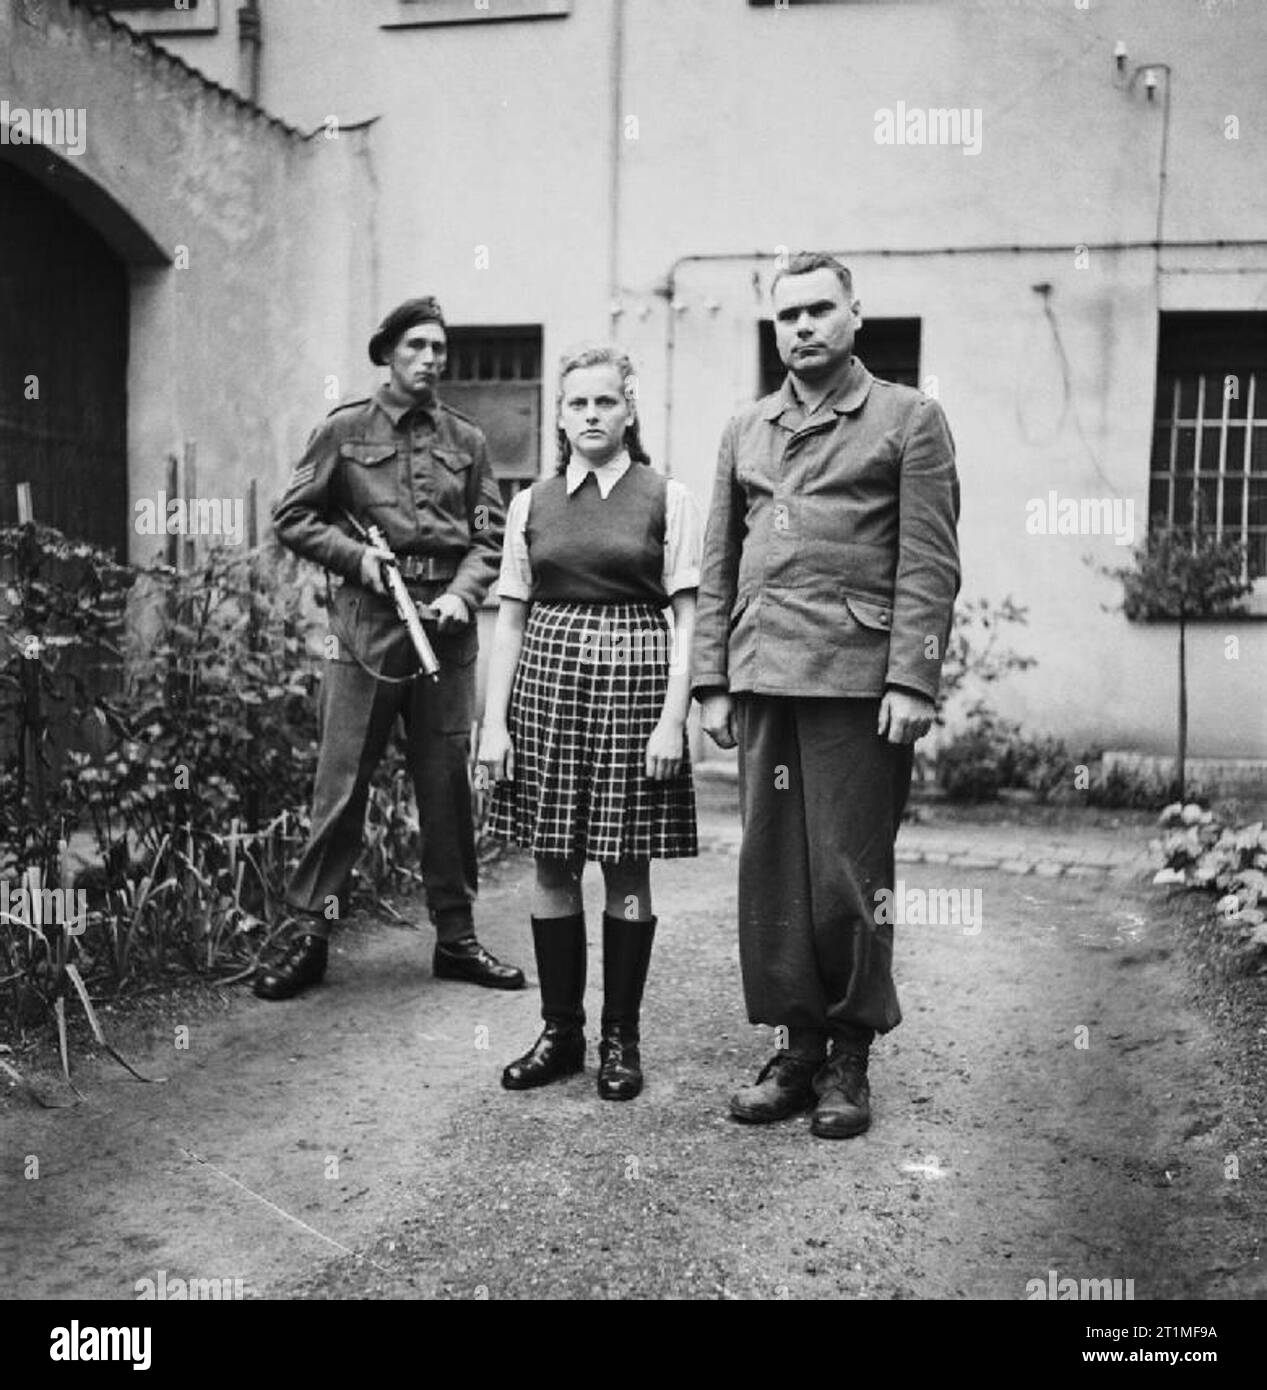 The Liberation of Bergen-belsen Concentration Camp 1945- Portraits of Belsen Guards at Celle Awaiting Trial, August 1945 Irma Grese standing in the courtyard of the Prisoner of War cage at Celle with Josef Kramer. Both were convicted of war crimes and sentenced to death. Stock Photo